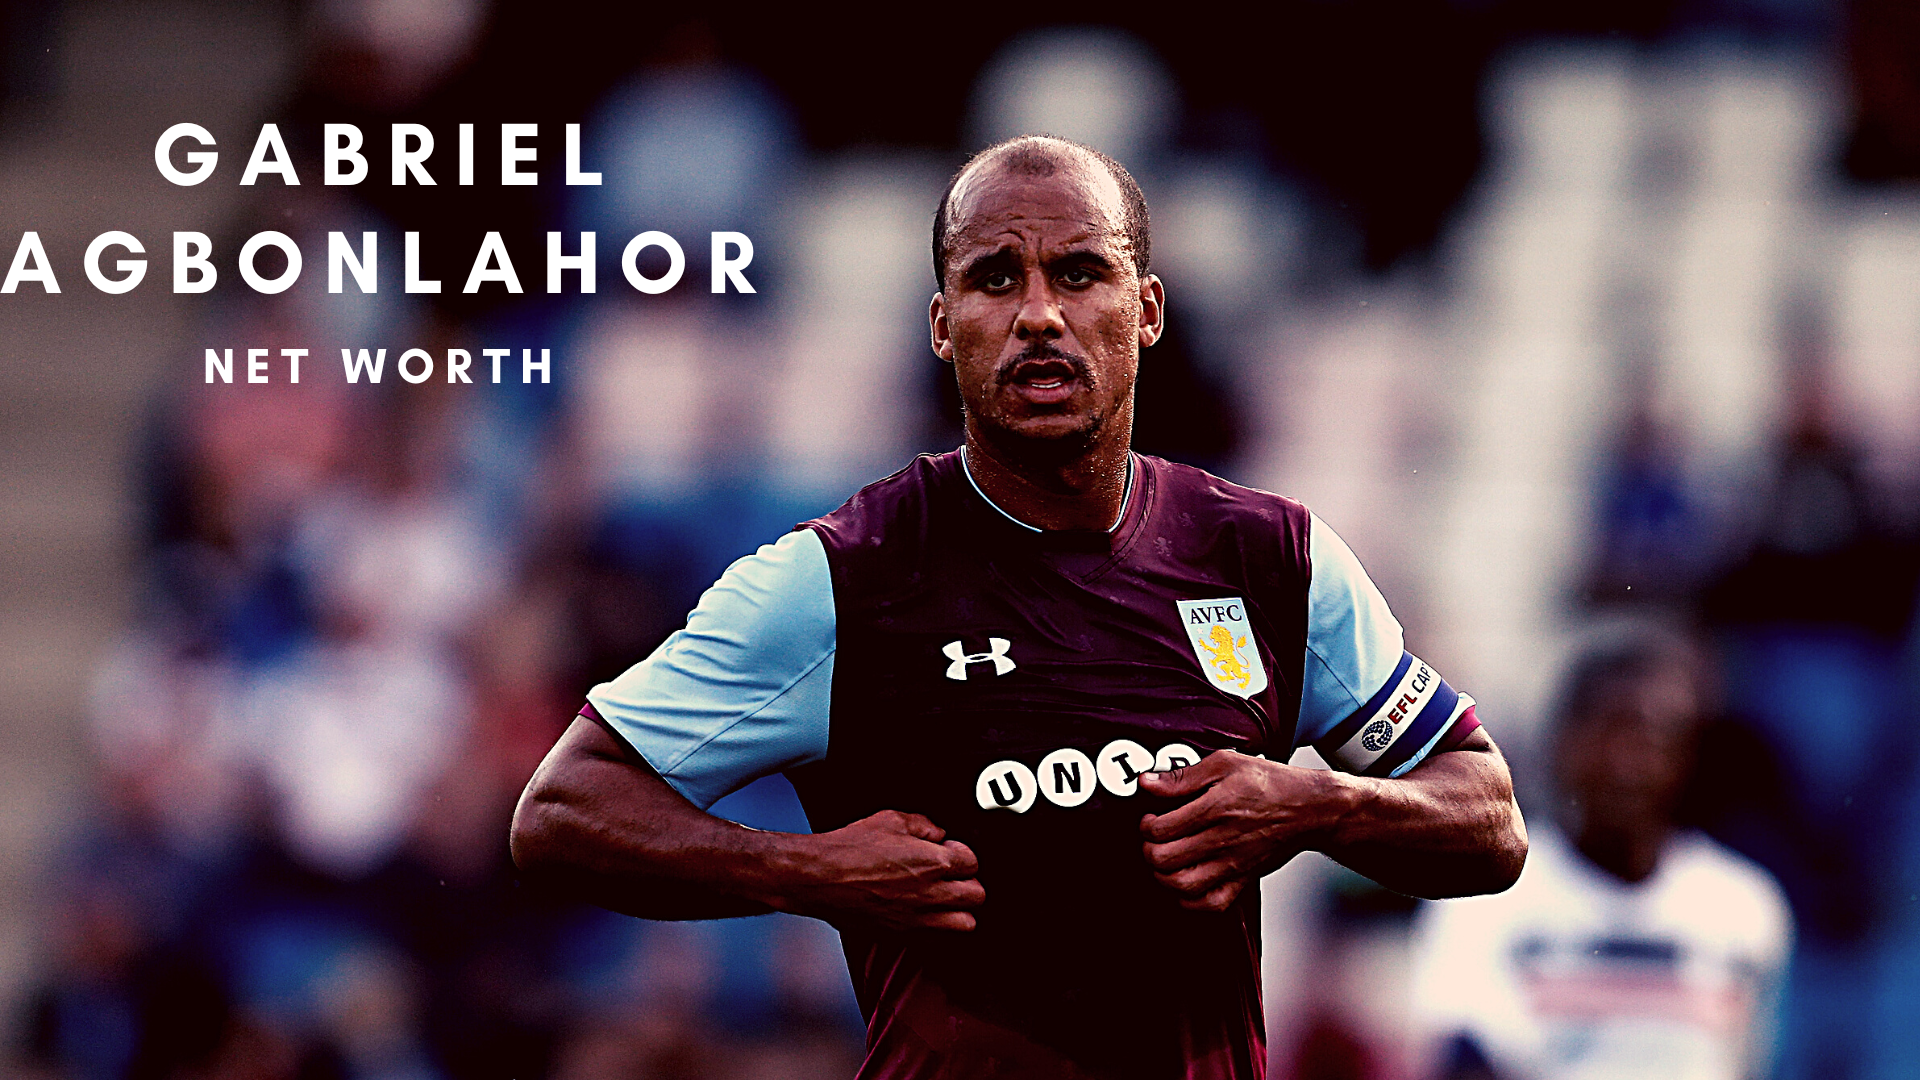 Gabriel Agbonlahor 2022 - Net Worth, Wife, Salary, Endorsements, Former Clubs, Current Job and more